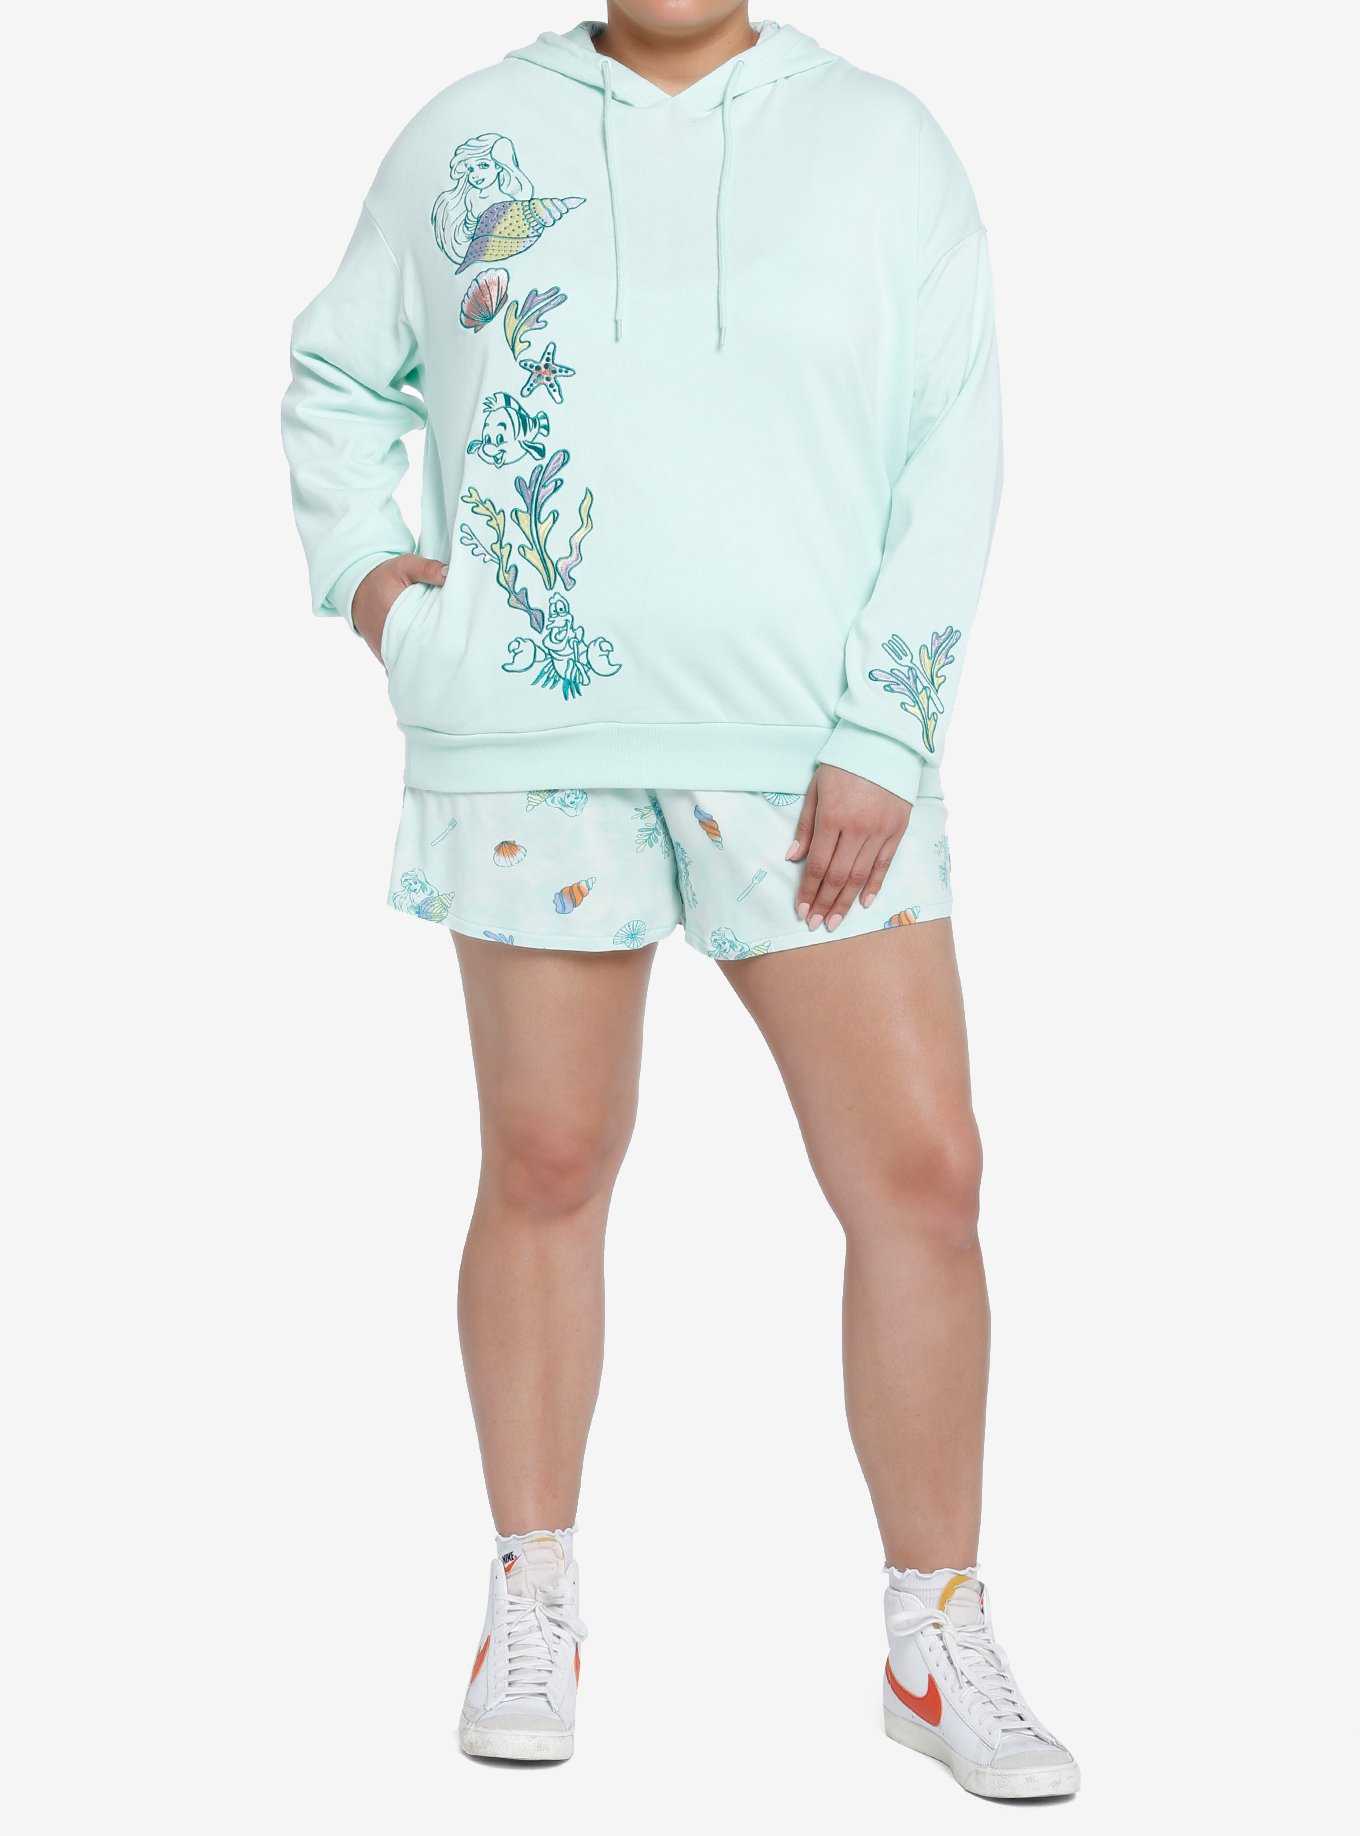 Her Universe Disney The Little Mermaid Embroidered Hoodie Plus Size Her Universe Exclusive, , hi-res